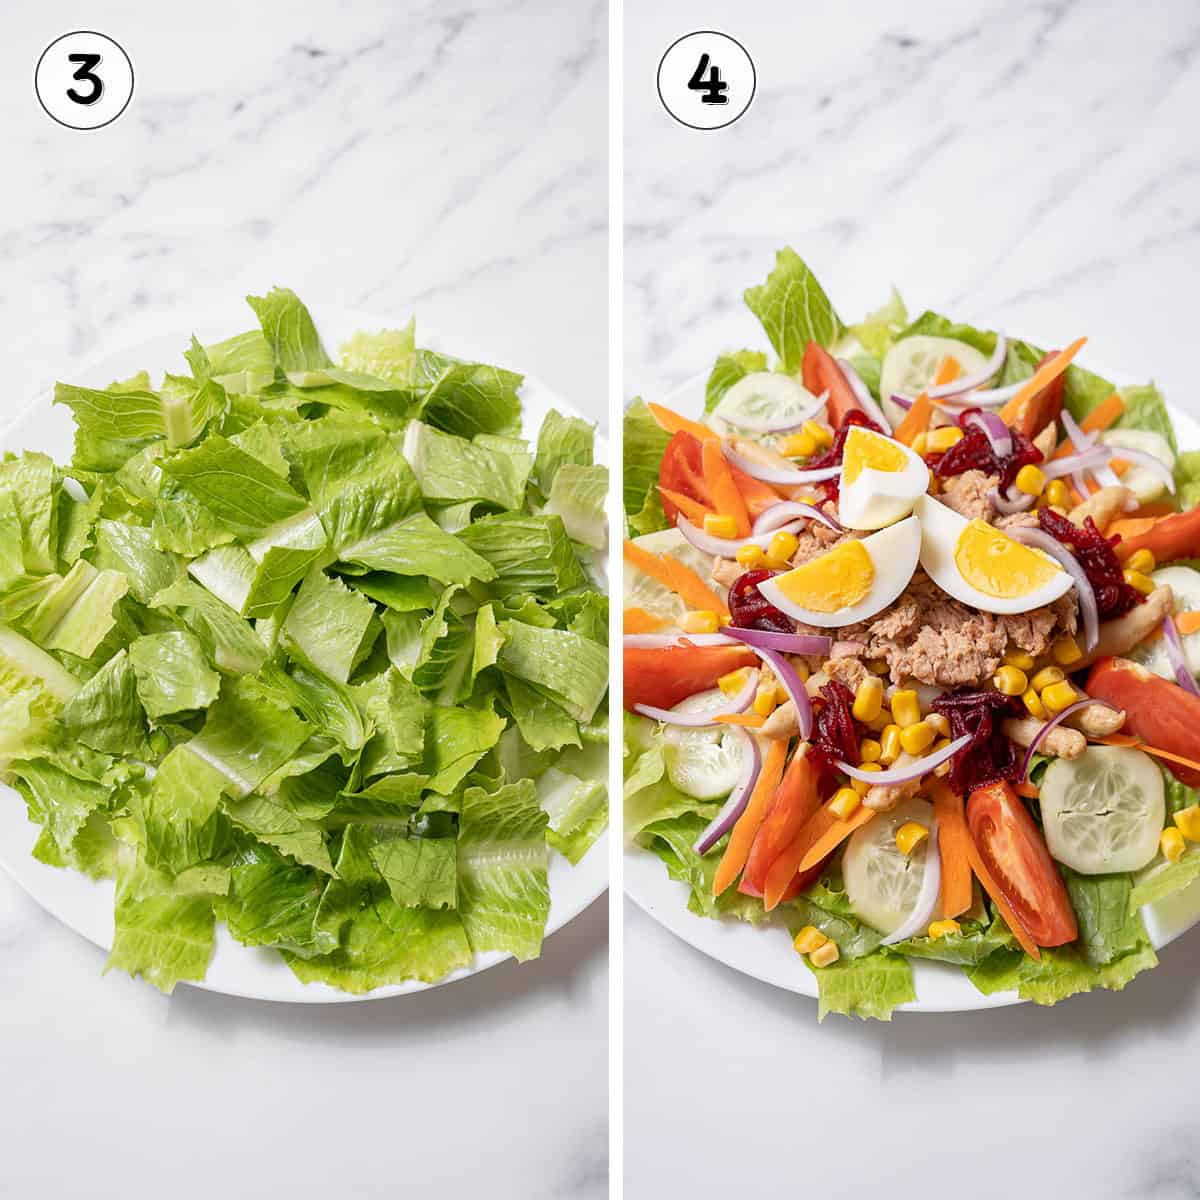 layering the lettuce and veggies on a plate.